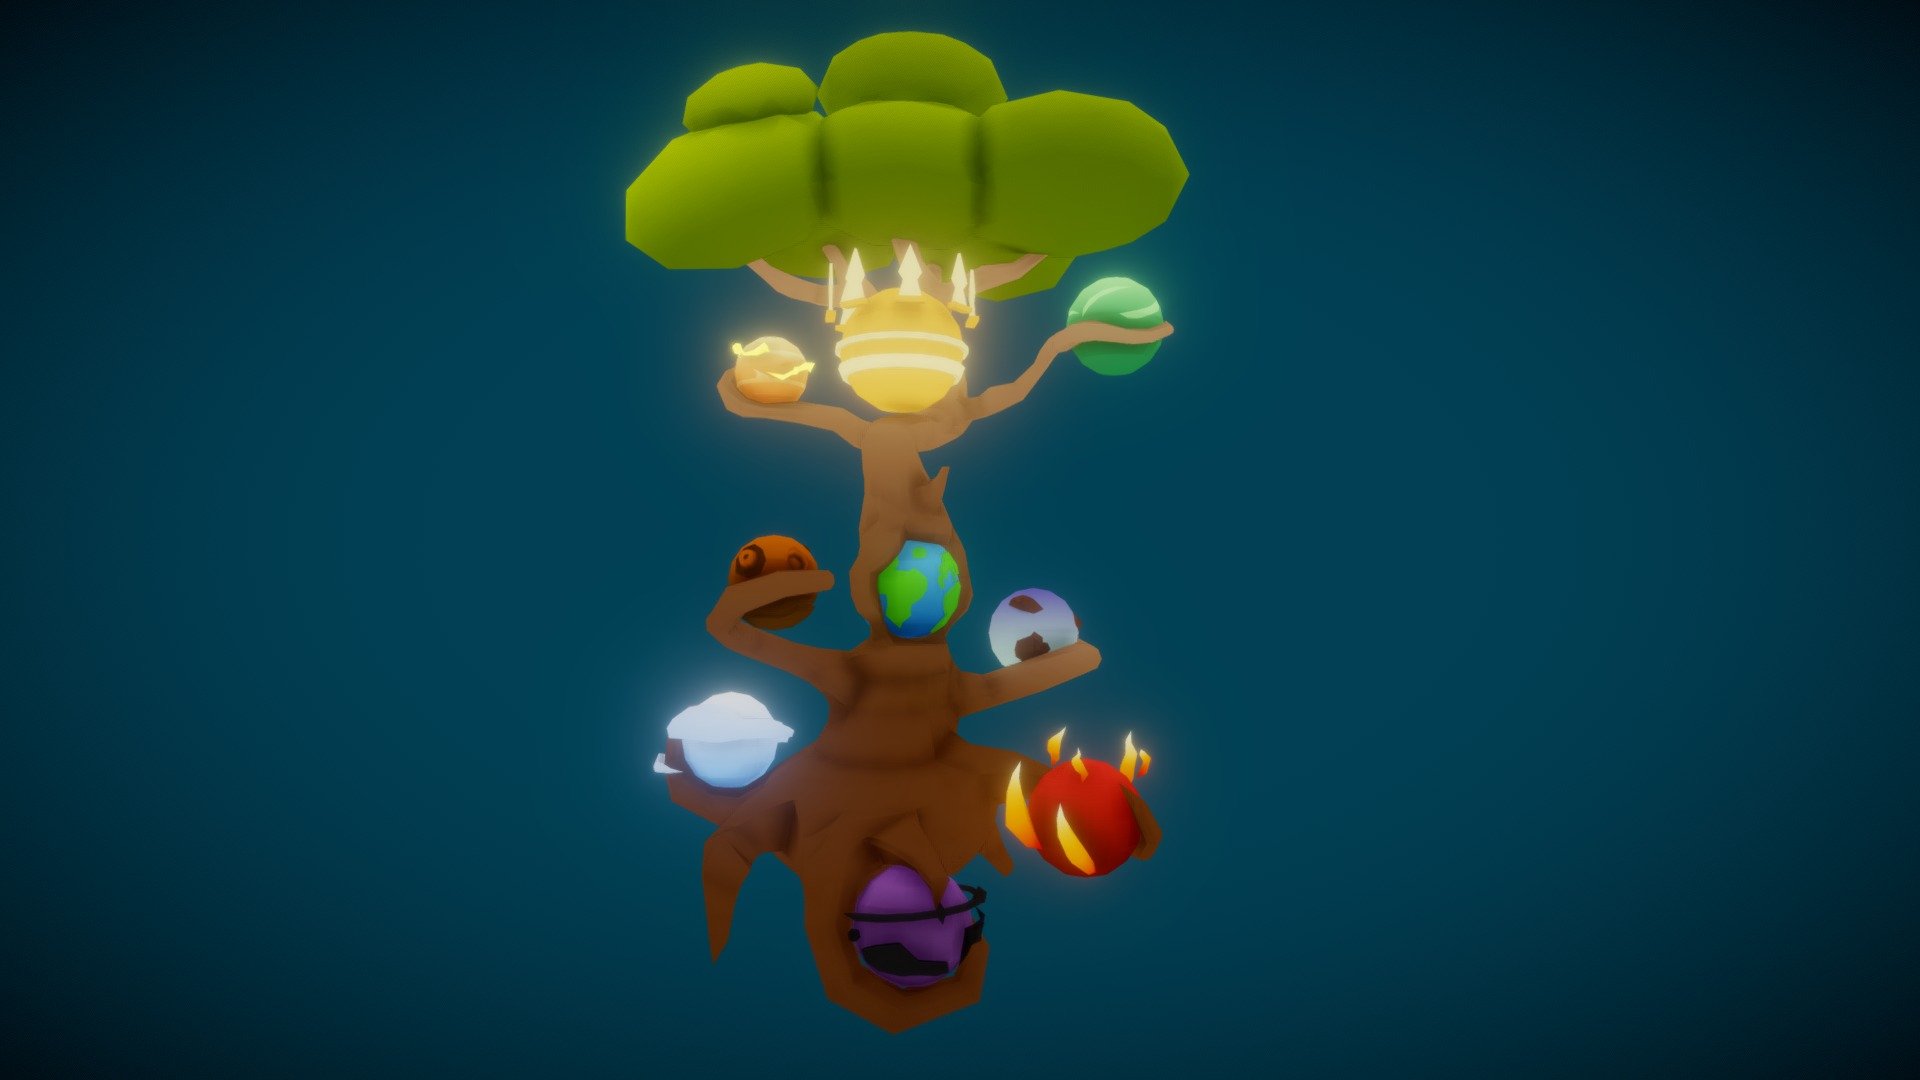 3December 2021 Day 12: #Tree.

“Behold, Yggdrasil! The World Tree that connects the Nine Realms.” - 3December 2021 Day 12: Tree - Download Free 3D model by Liberi Arcano (@LiberiArcano) 3d model